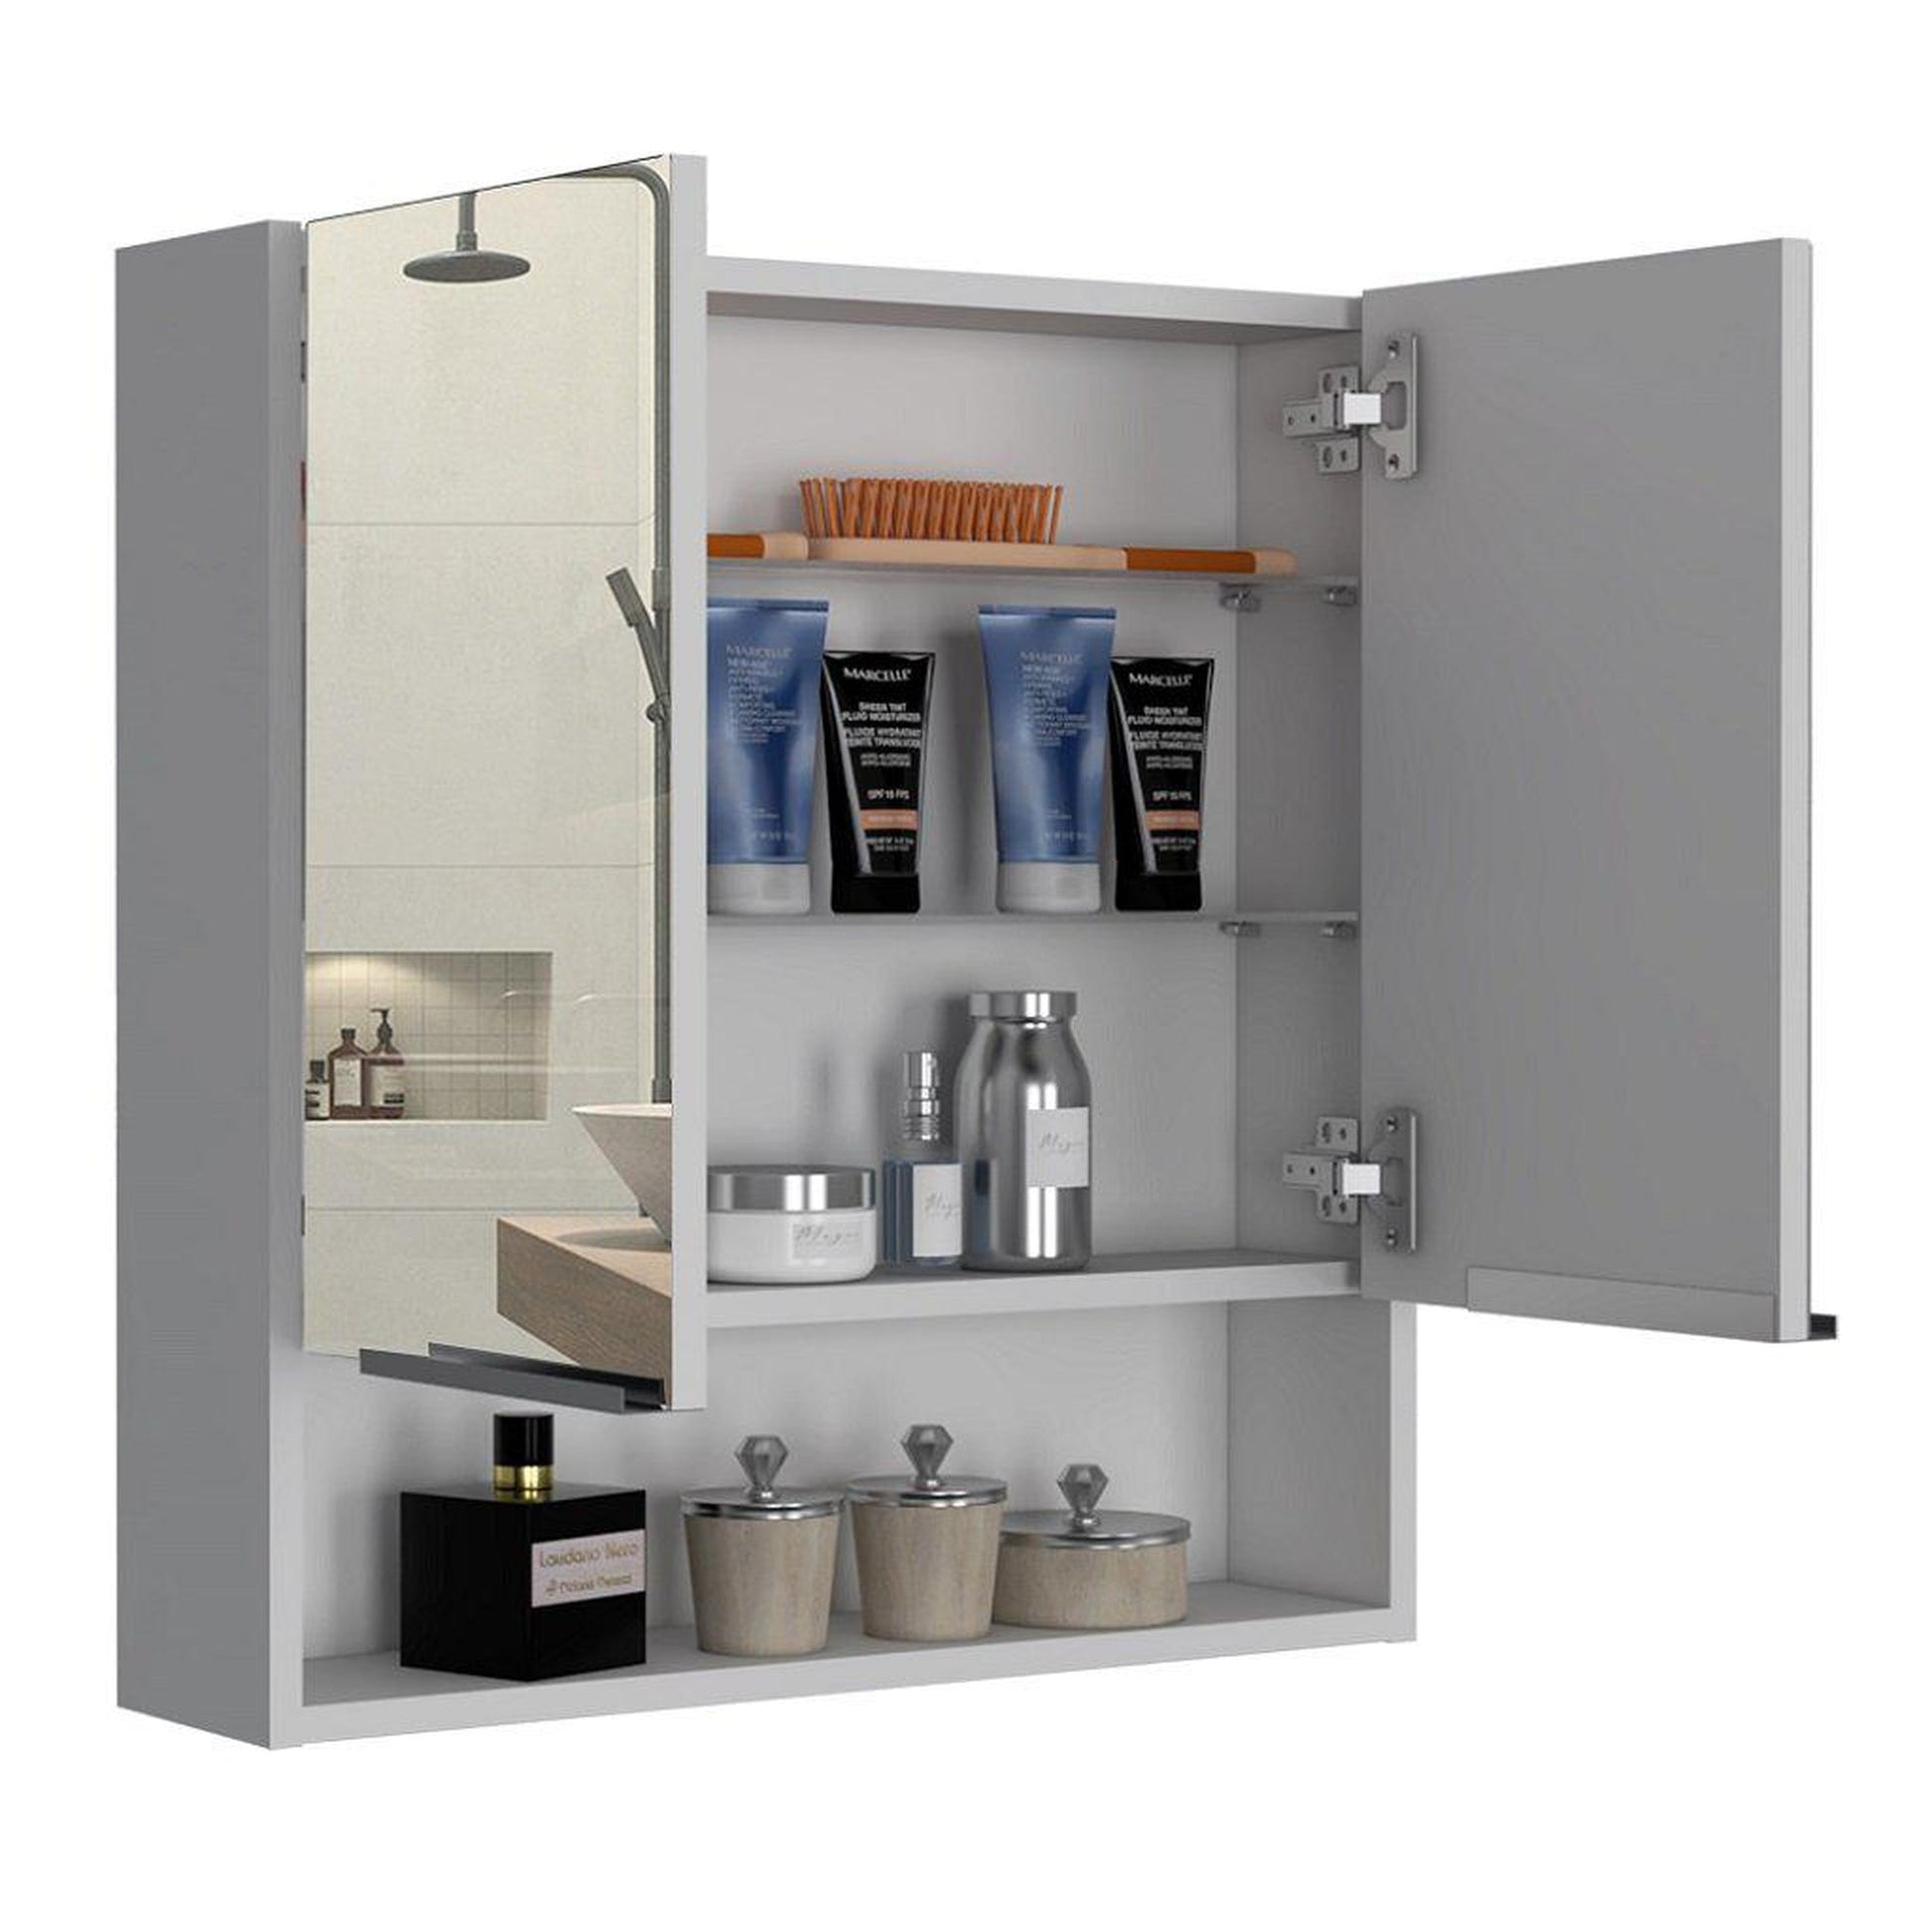 Omnimed 16 x 16.75 Wall Mounted Cabinet Finish: Beige